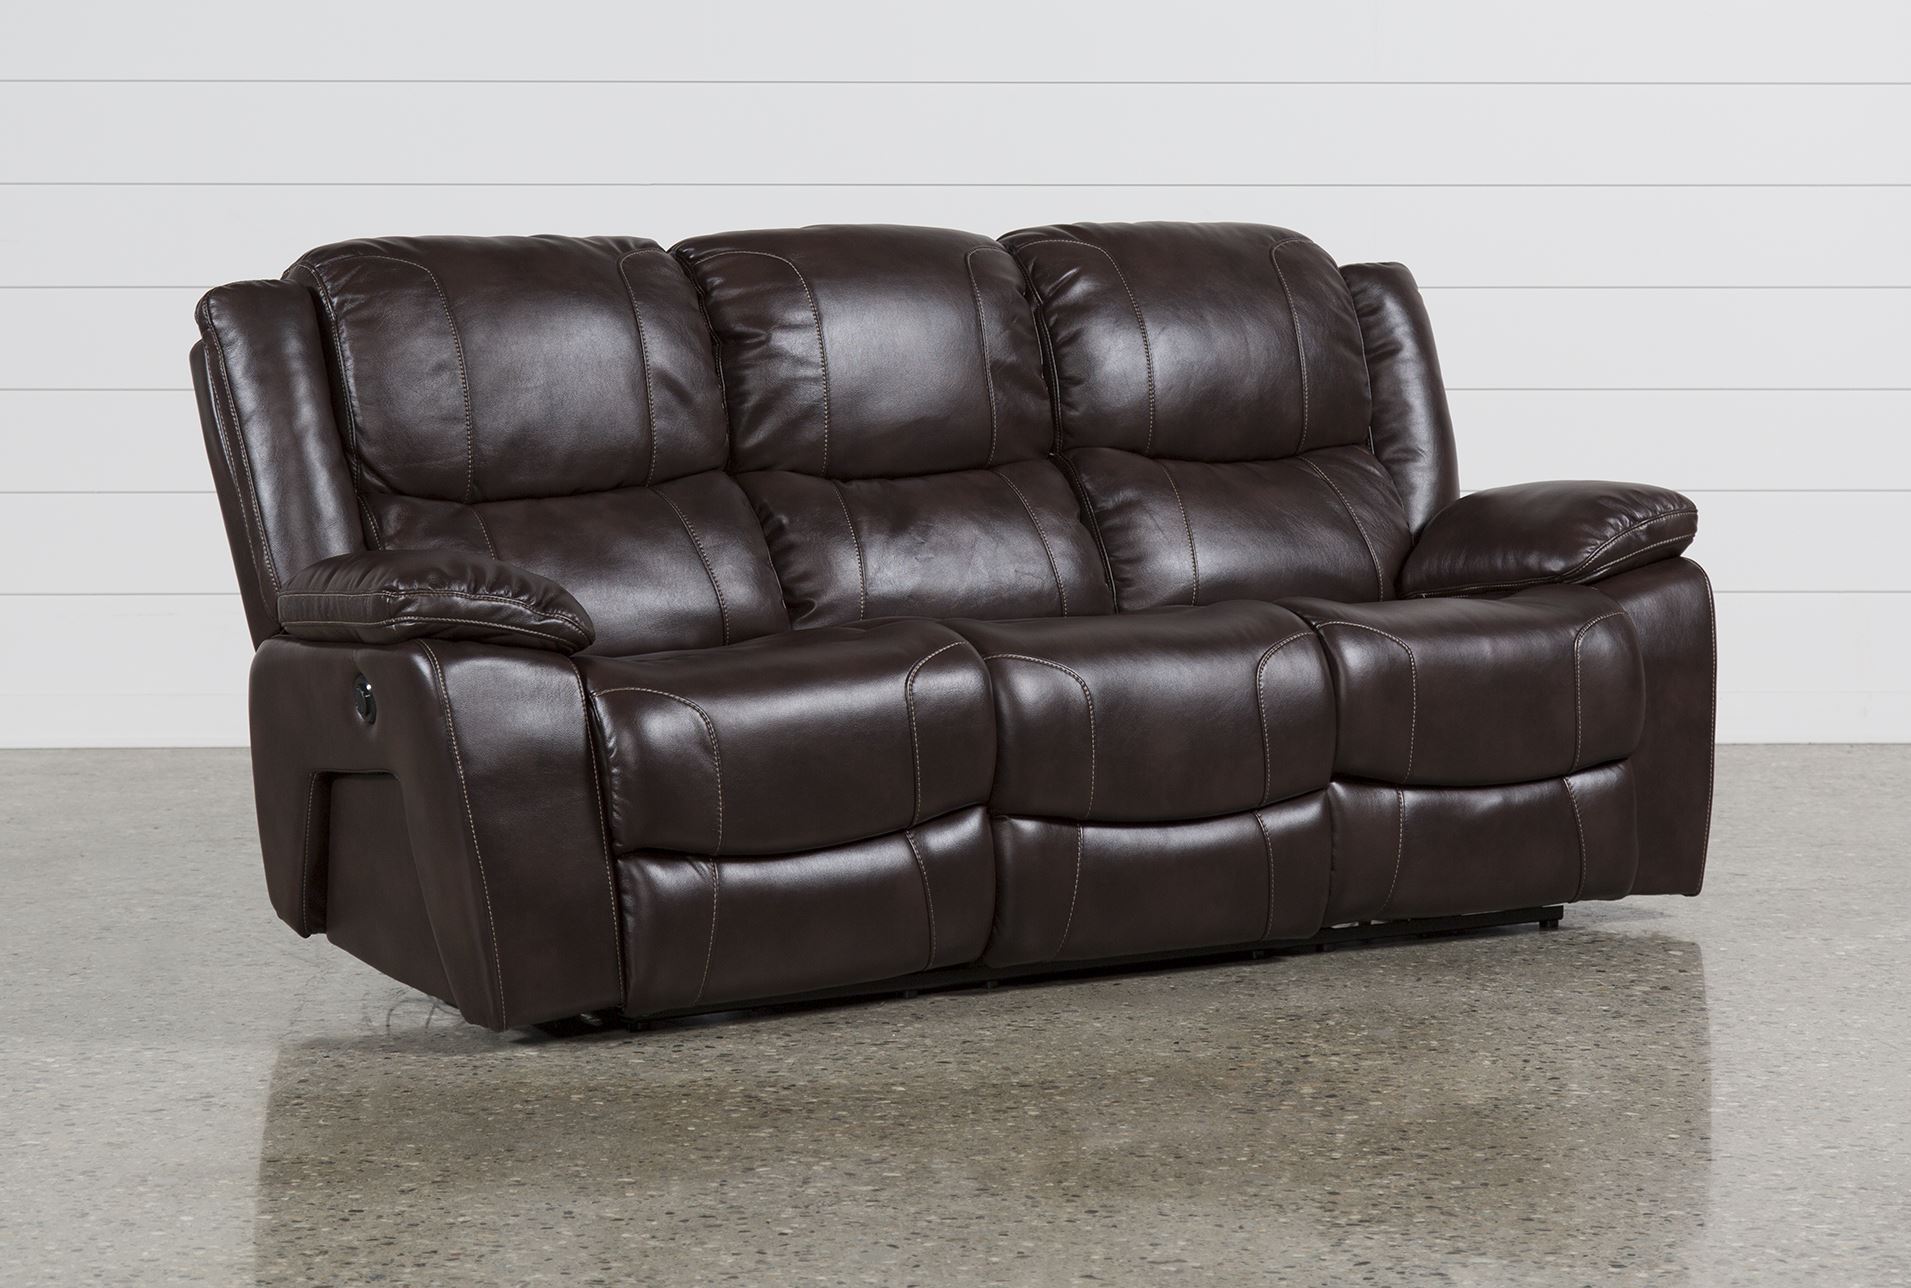 Reclining Sofas for Your Home & fice